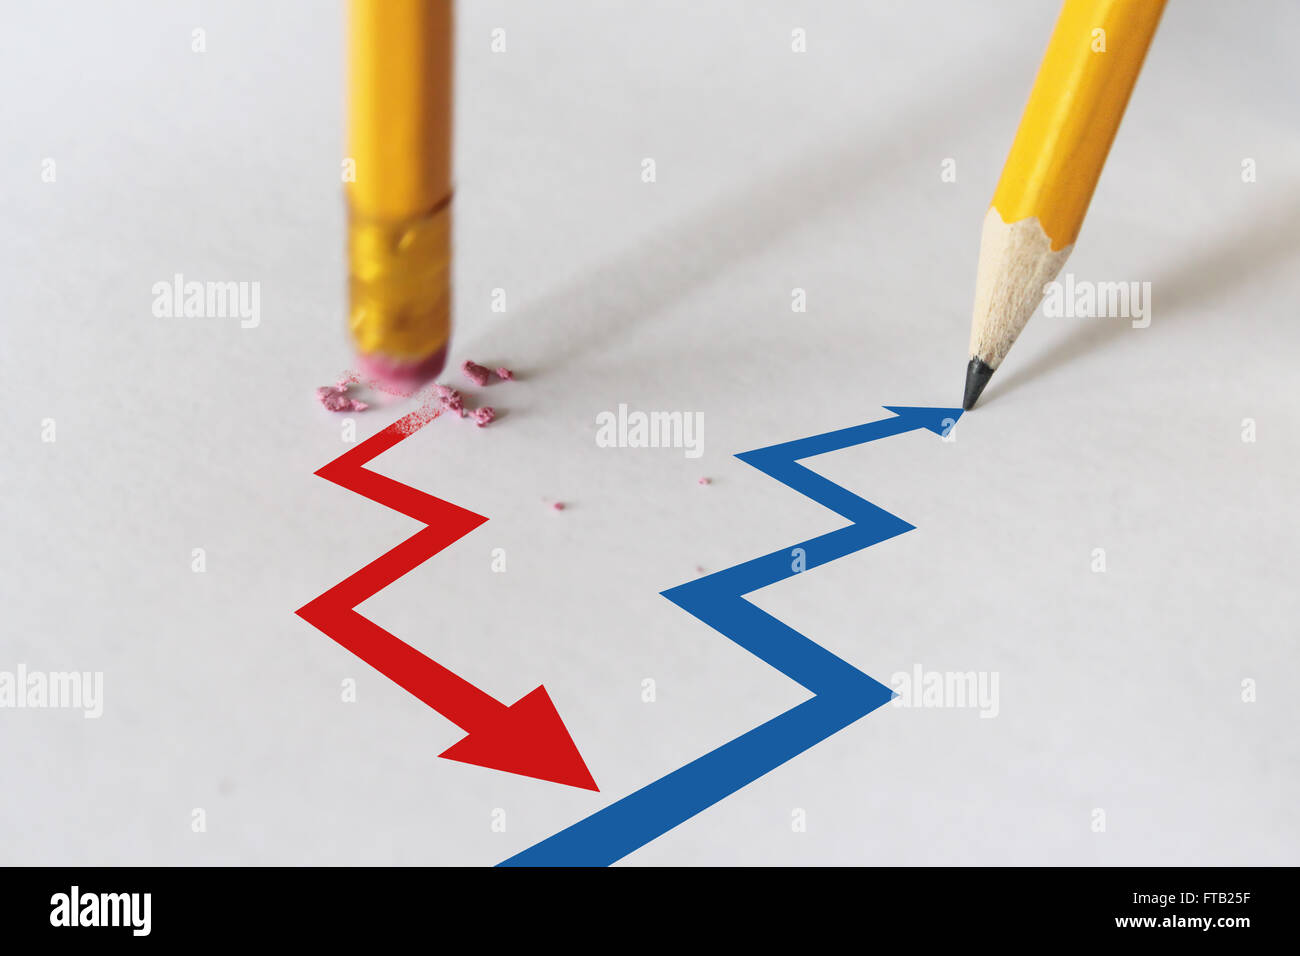 failure to success with pencil eraser Stock Photo